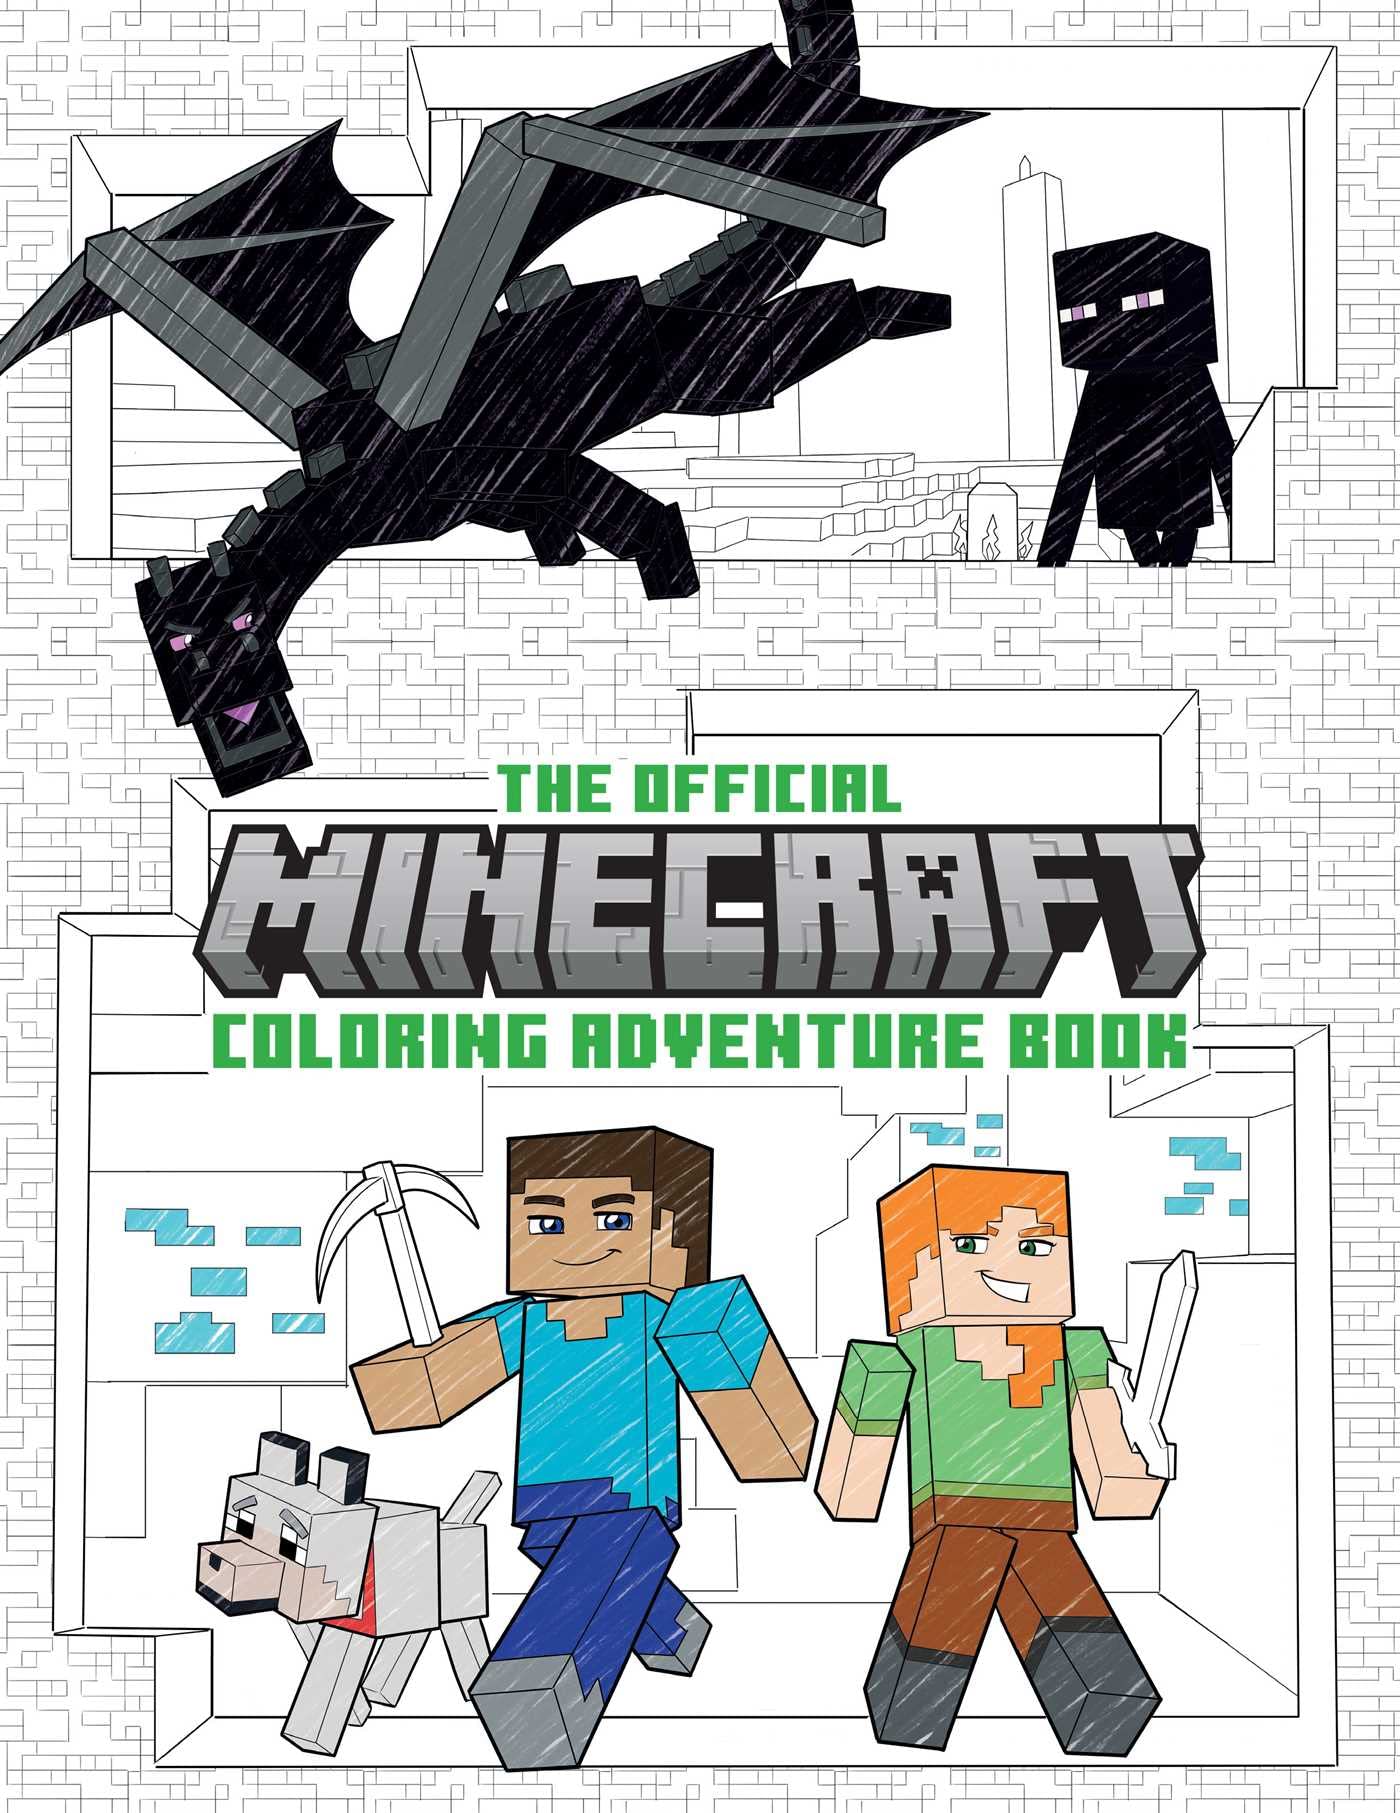 The Official Minecraft Coloring Adventures Book: Create, Explore, Color! by Insight Editions